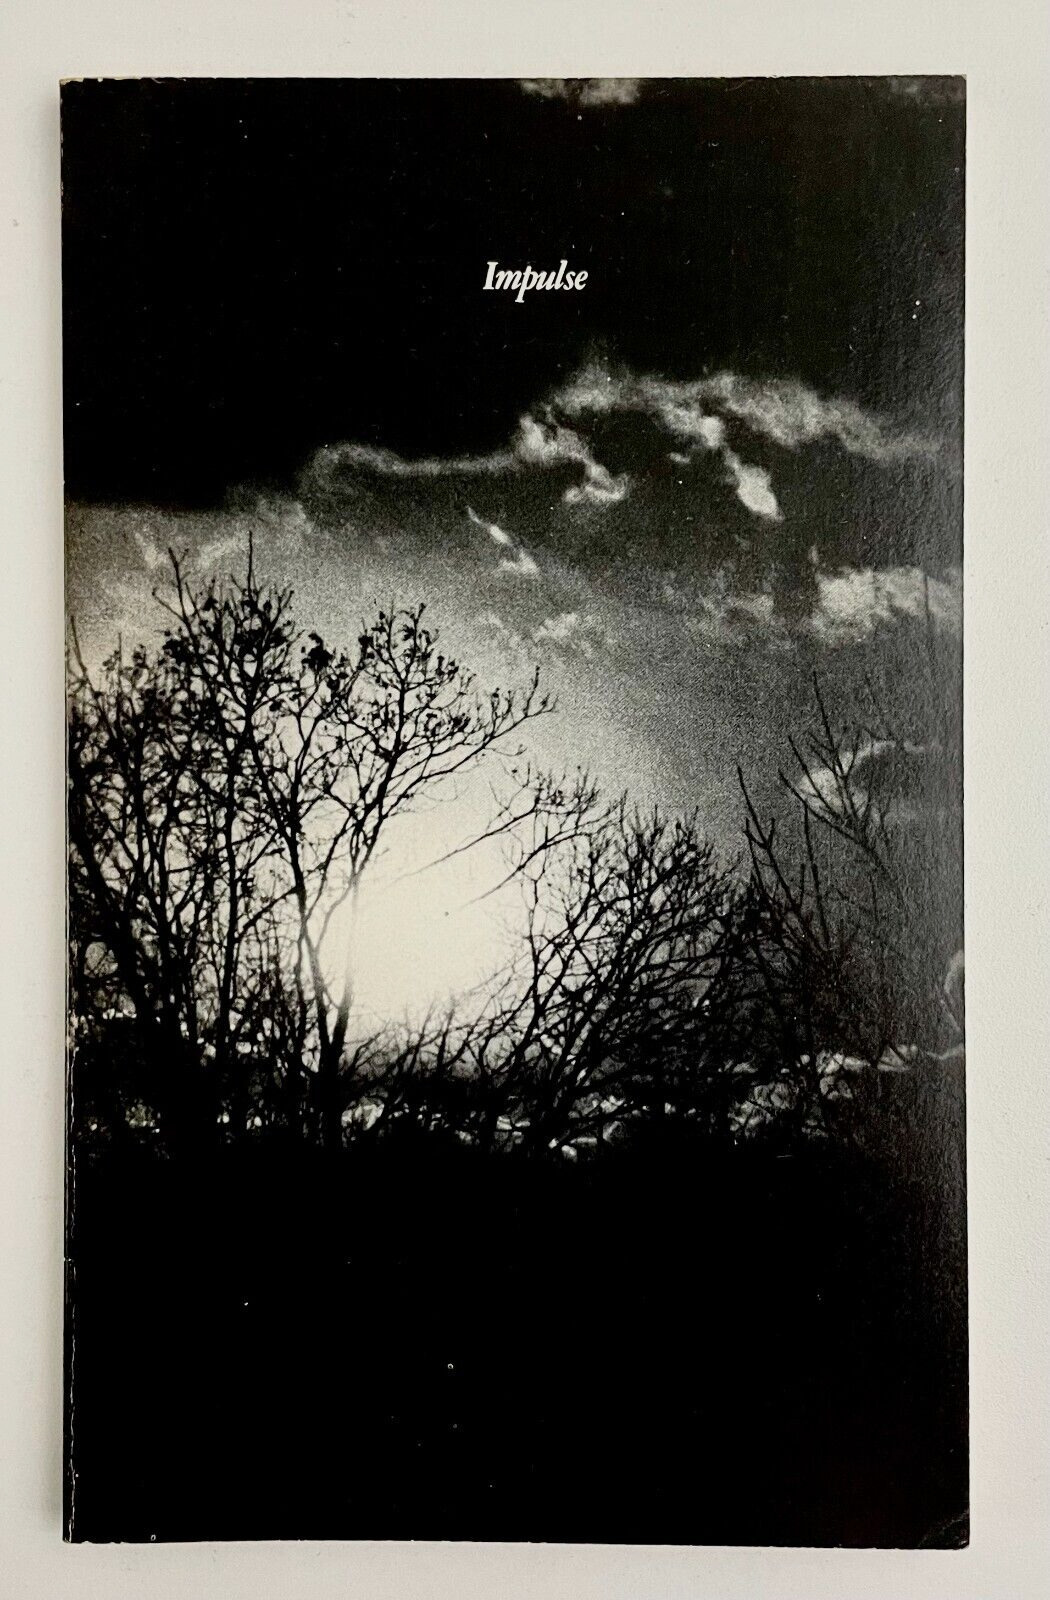 1976 Impulse Rockland Community College NY Literary Publication Poetry Stories